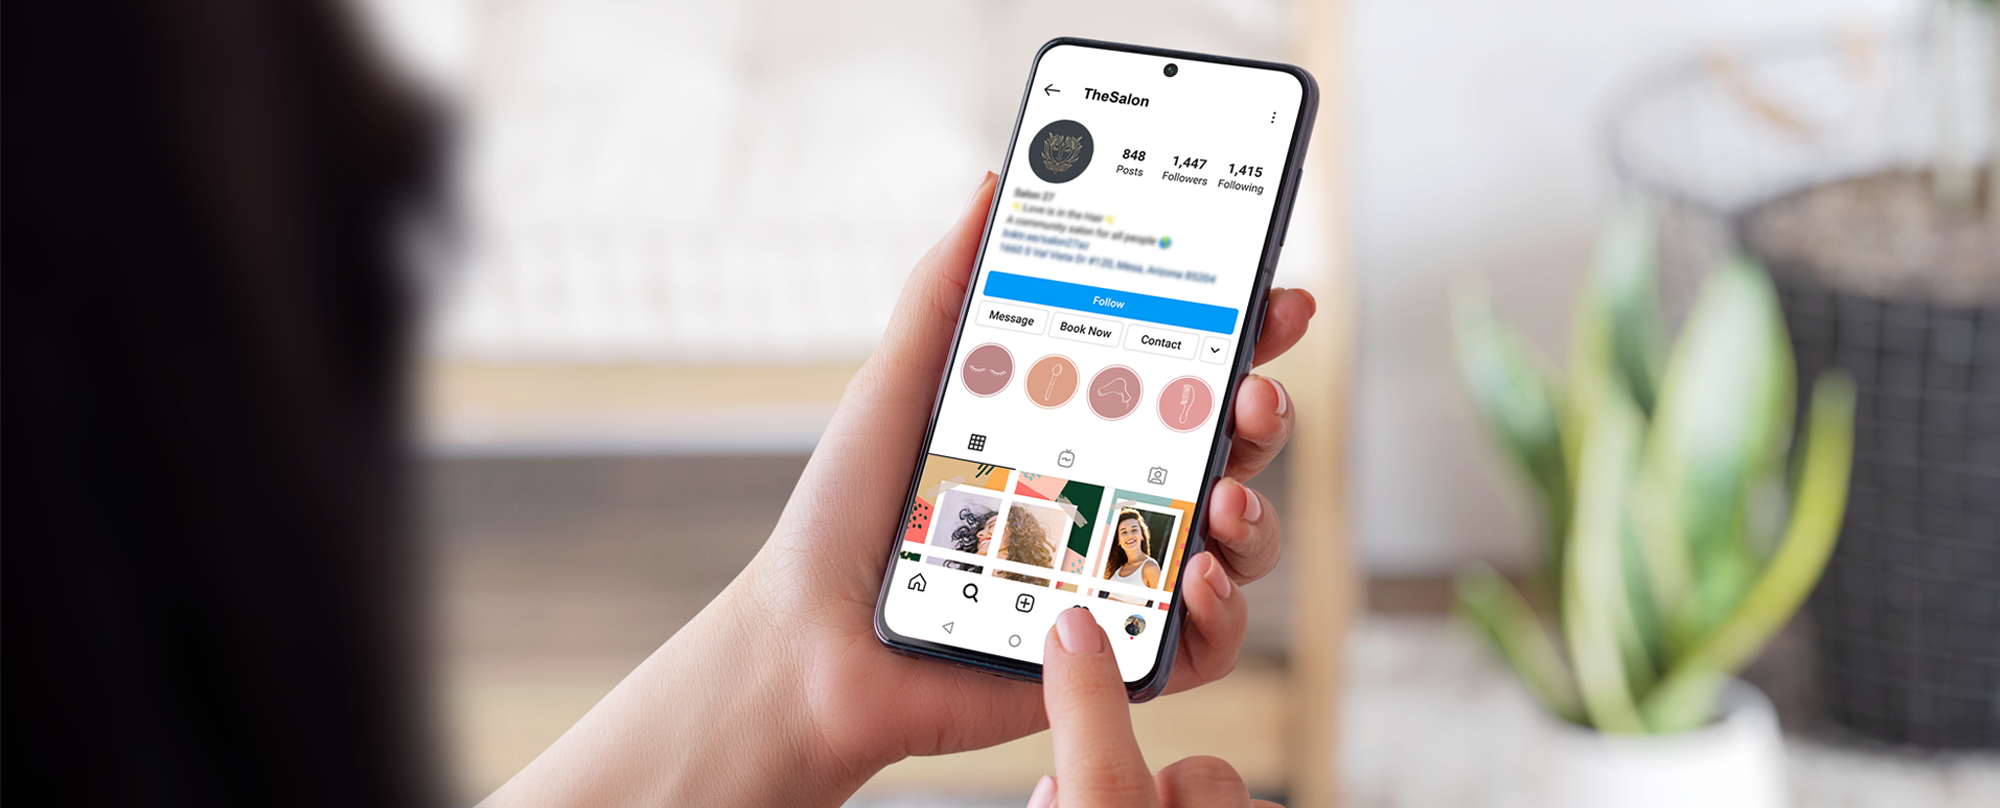 200 Million Instagram Users Check Business Profiles Daily – Are Your Clients Able to Book as They Scroll?